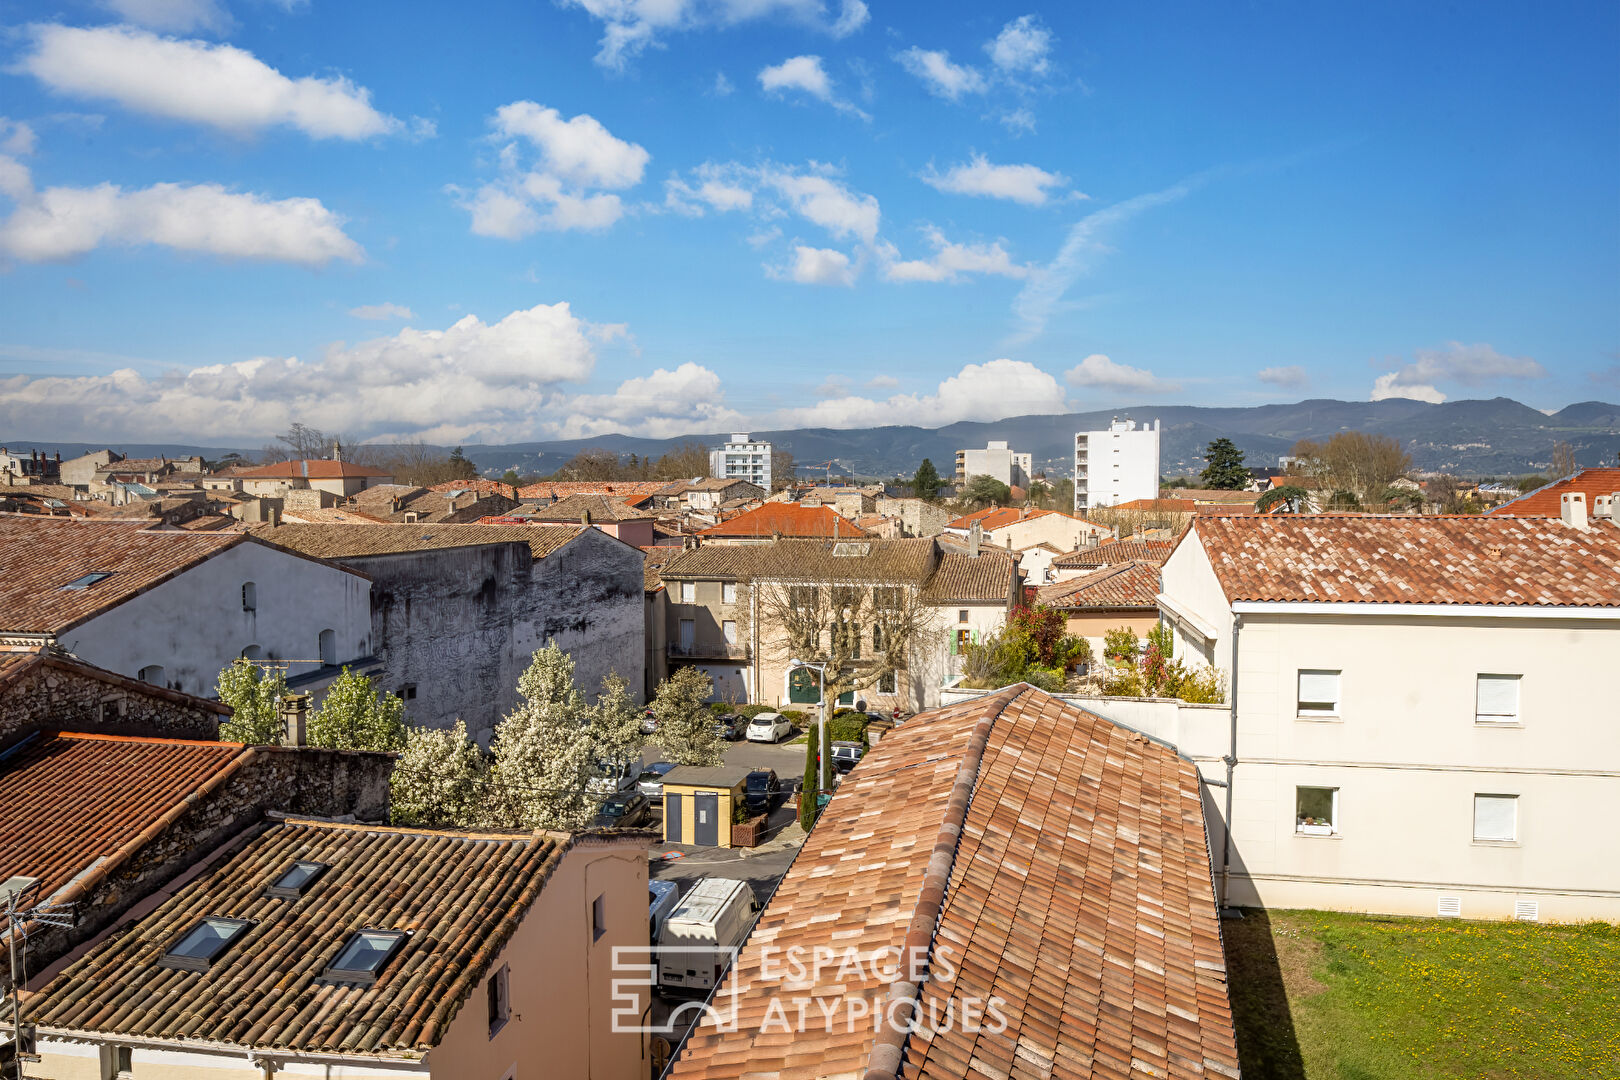 Flat with terrace and hammam on the roofs of Montelimar